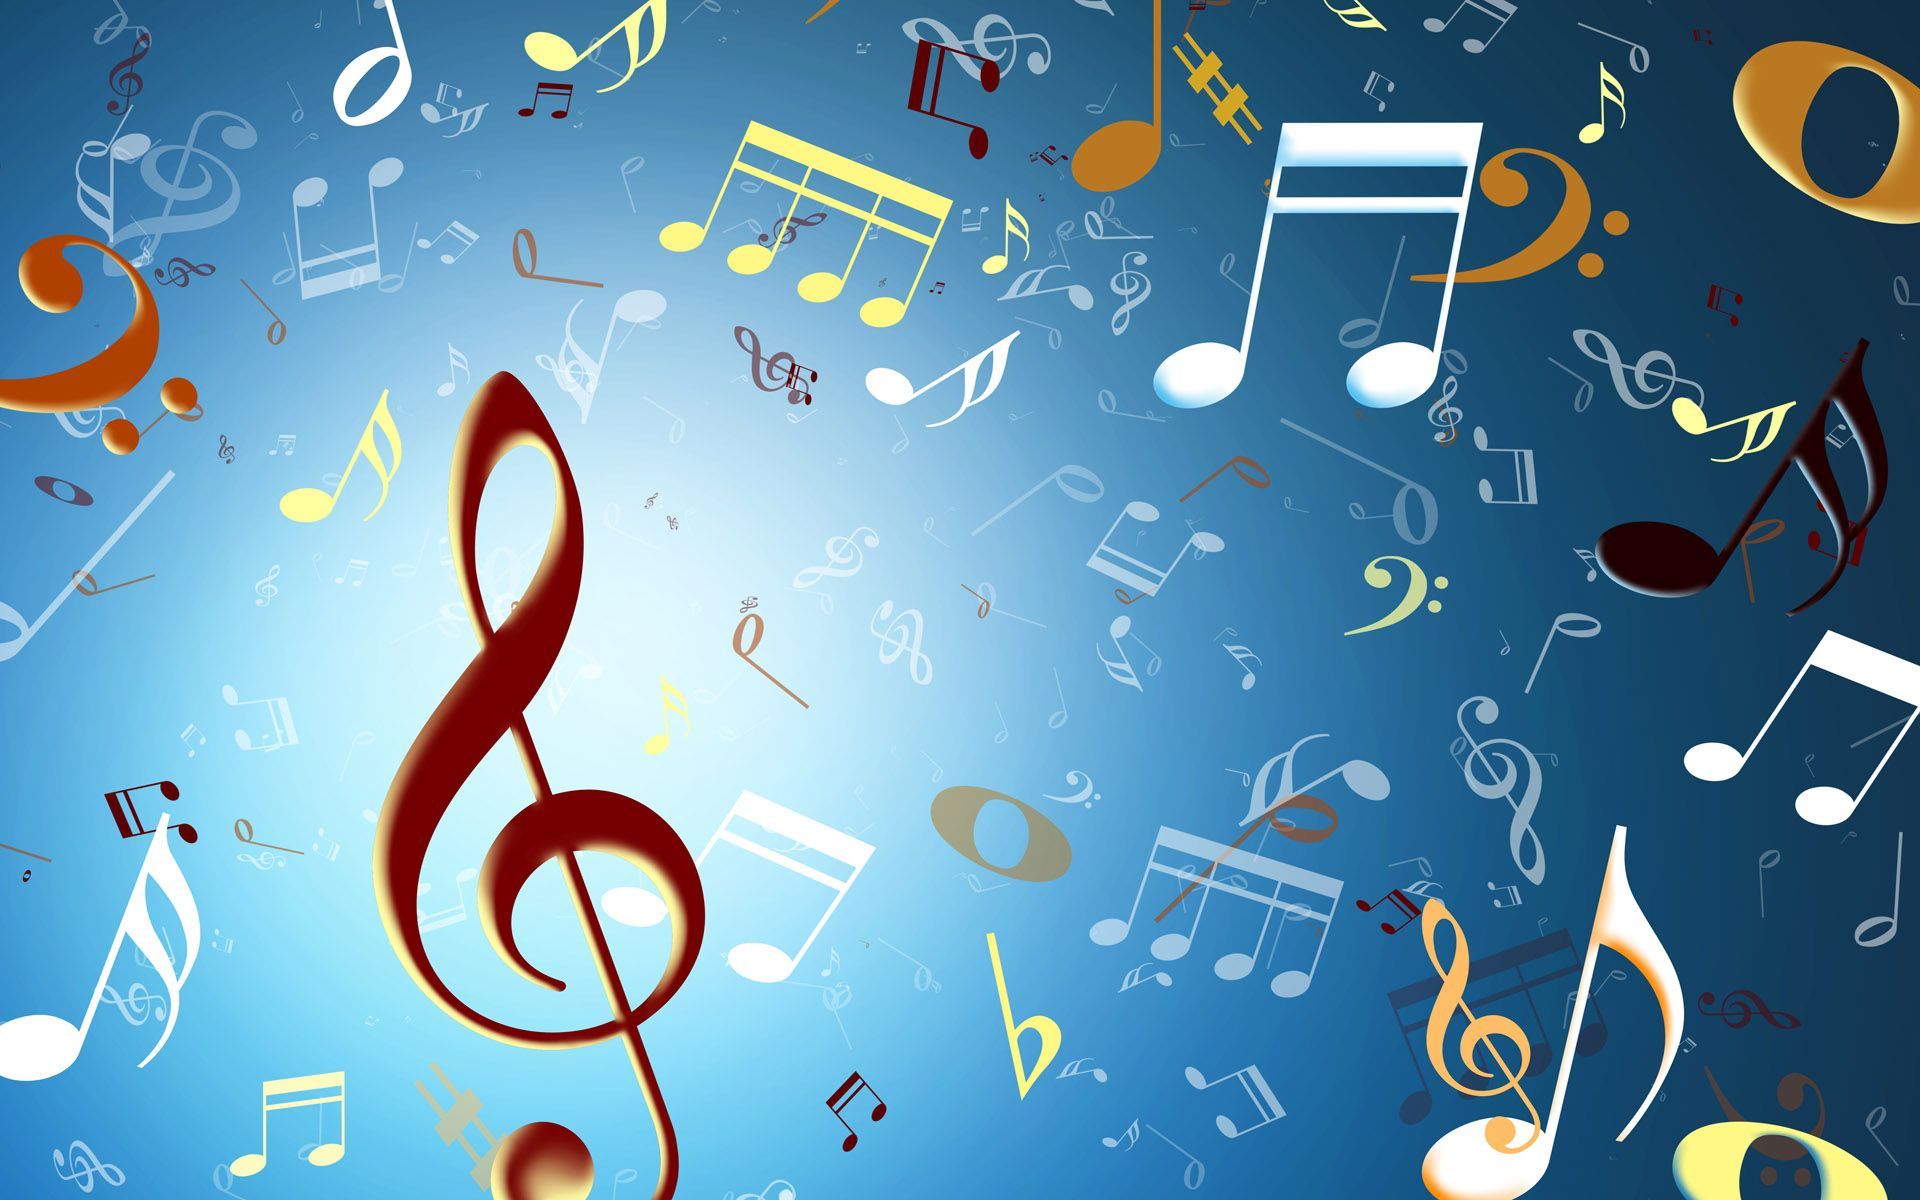 Music Wallpapers For Music Lovers Online Magazine for Designers